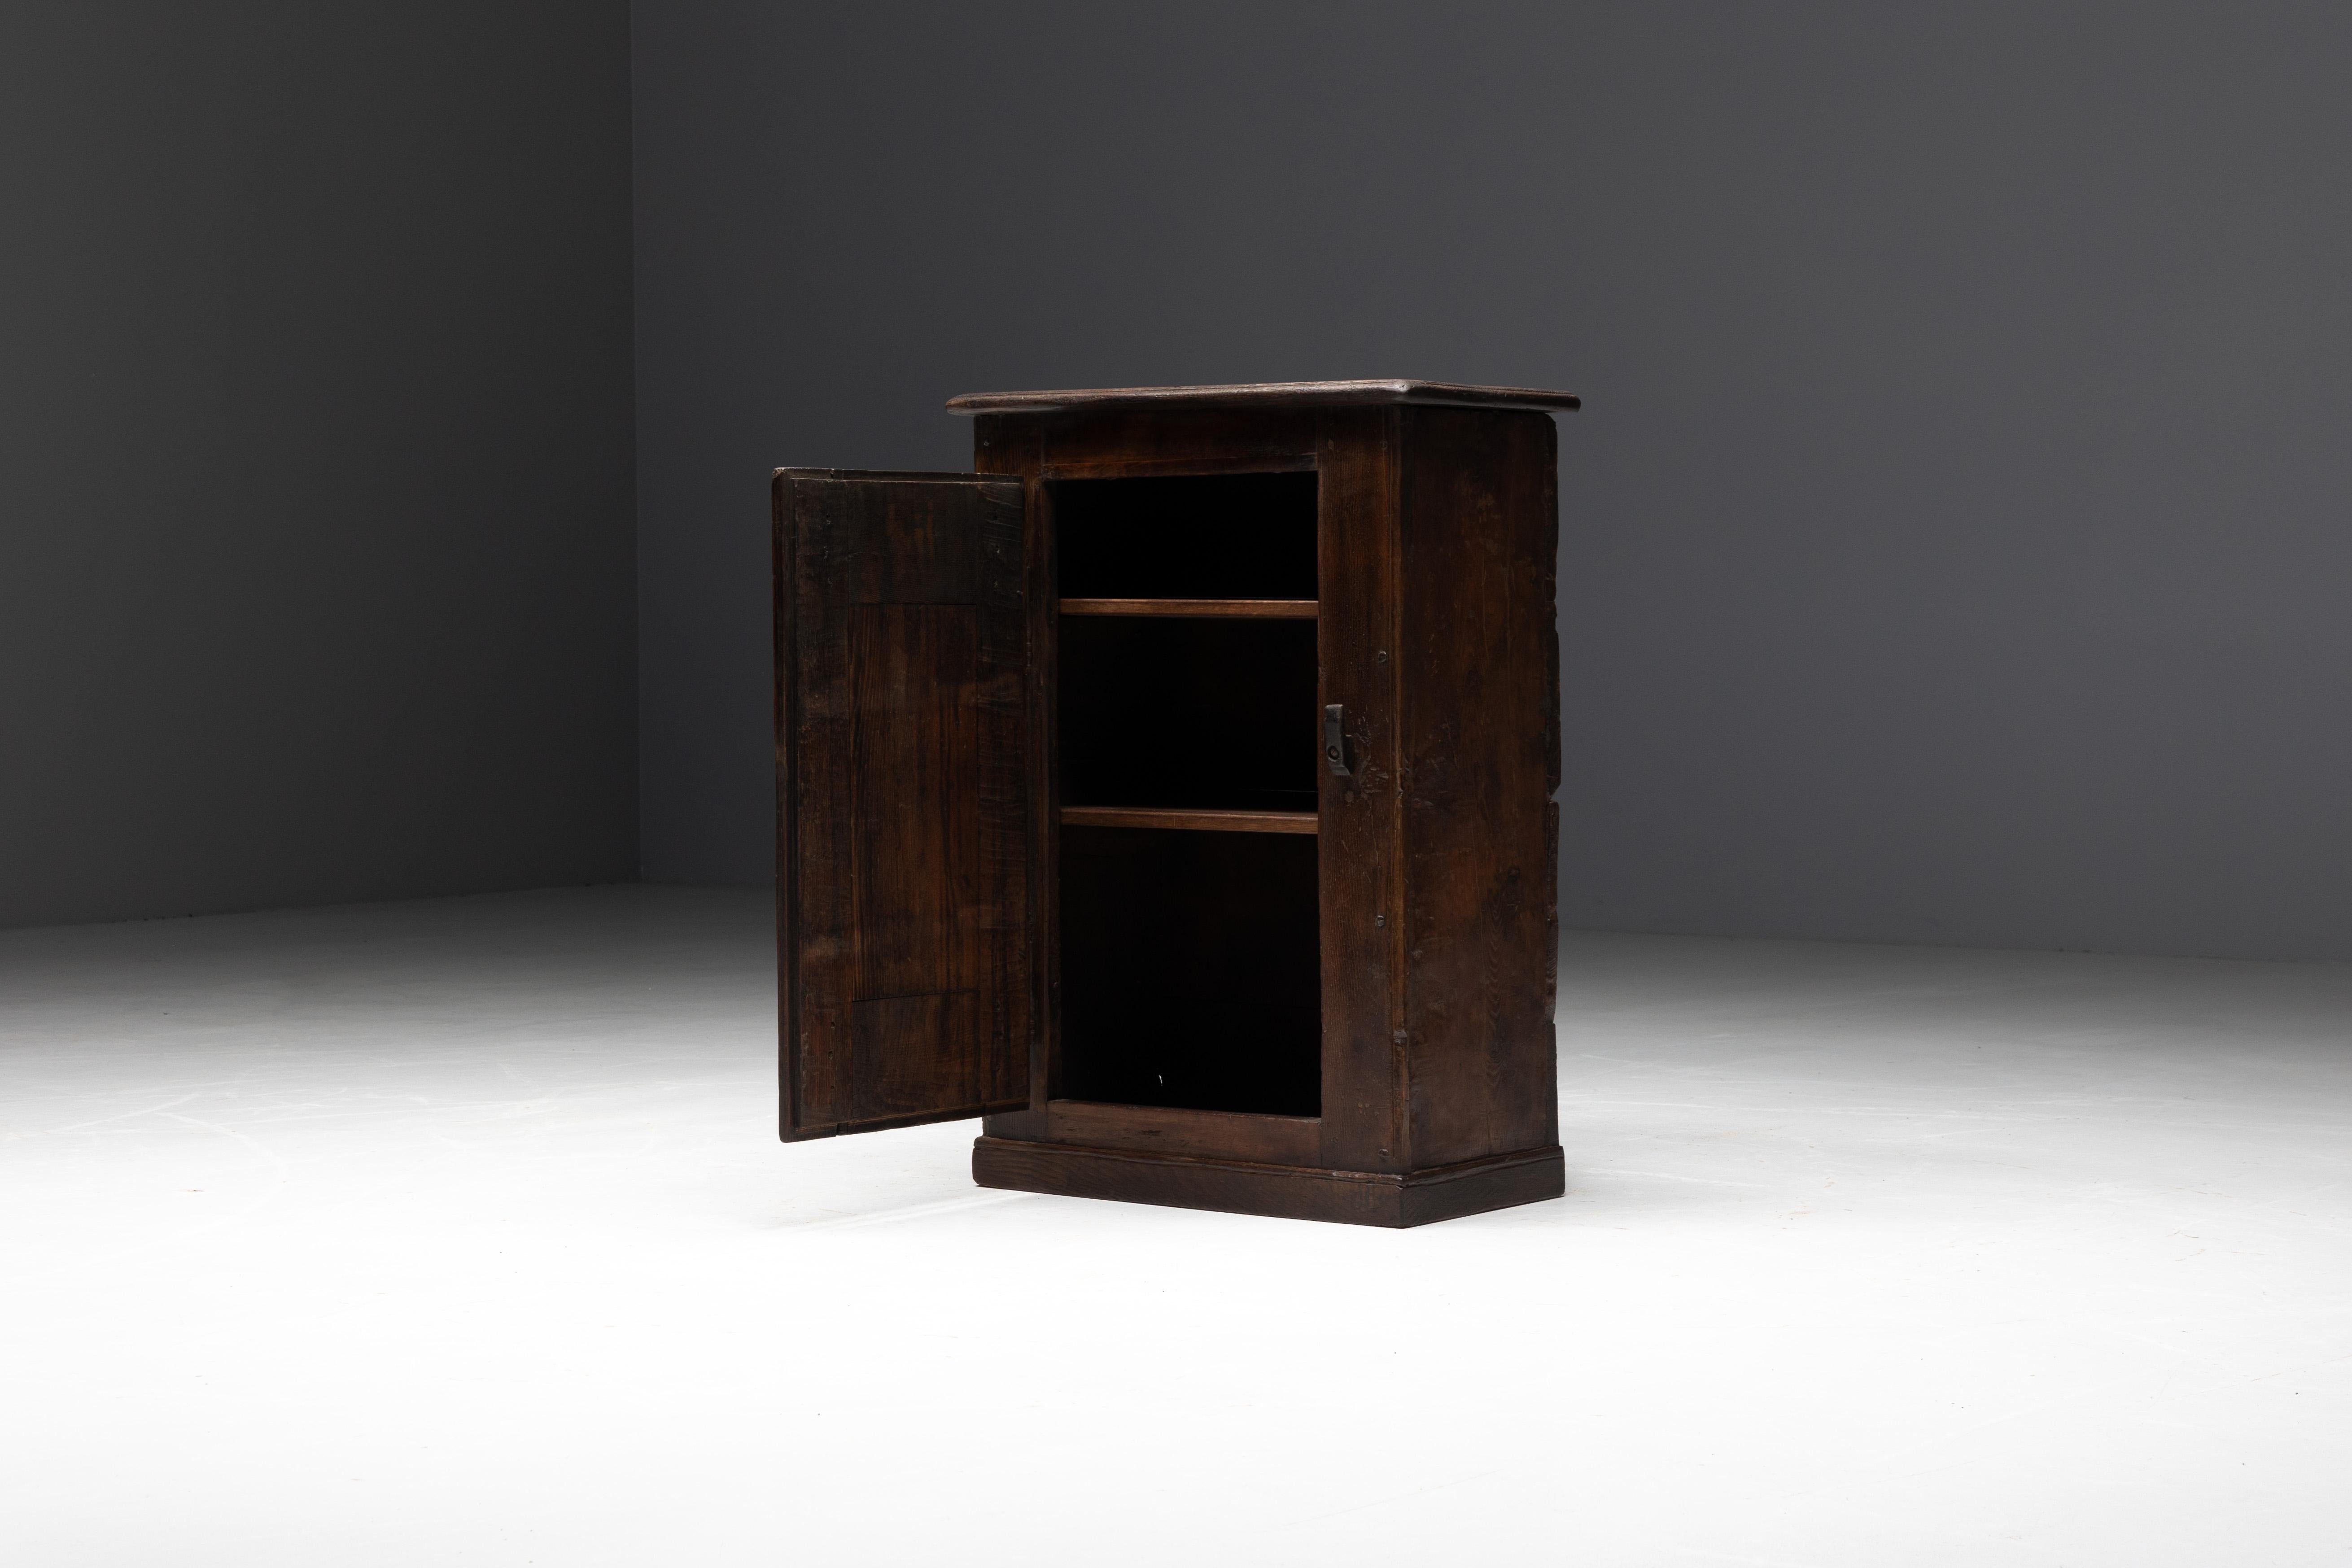 Rustic Art Populaire Cabinet or Confiturier, France, 19th Century For Sale 2